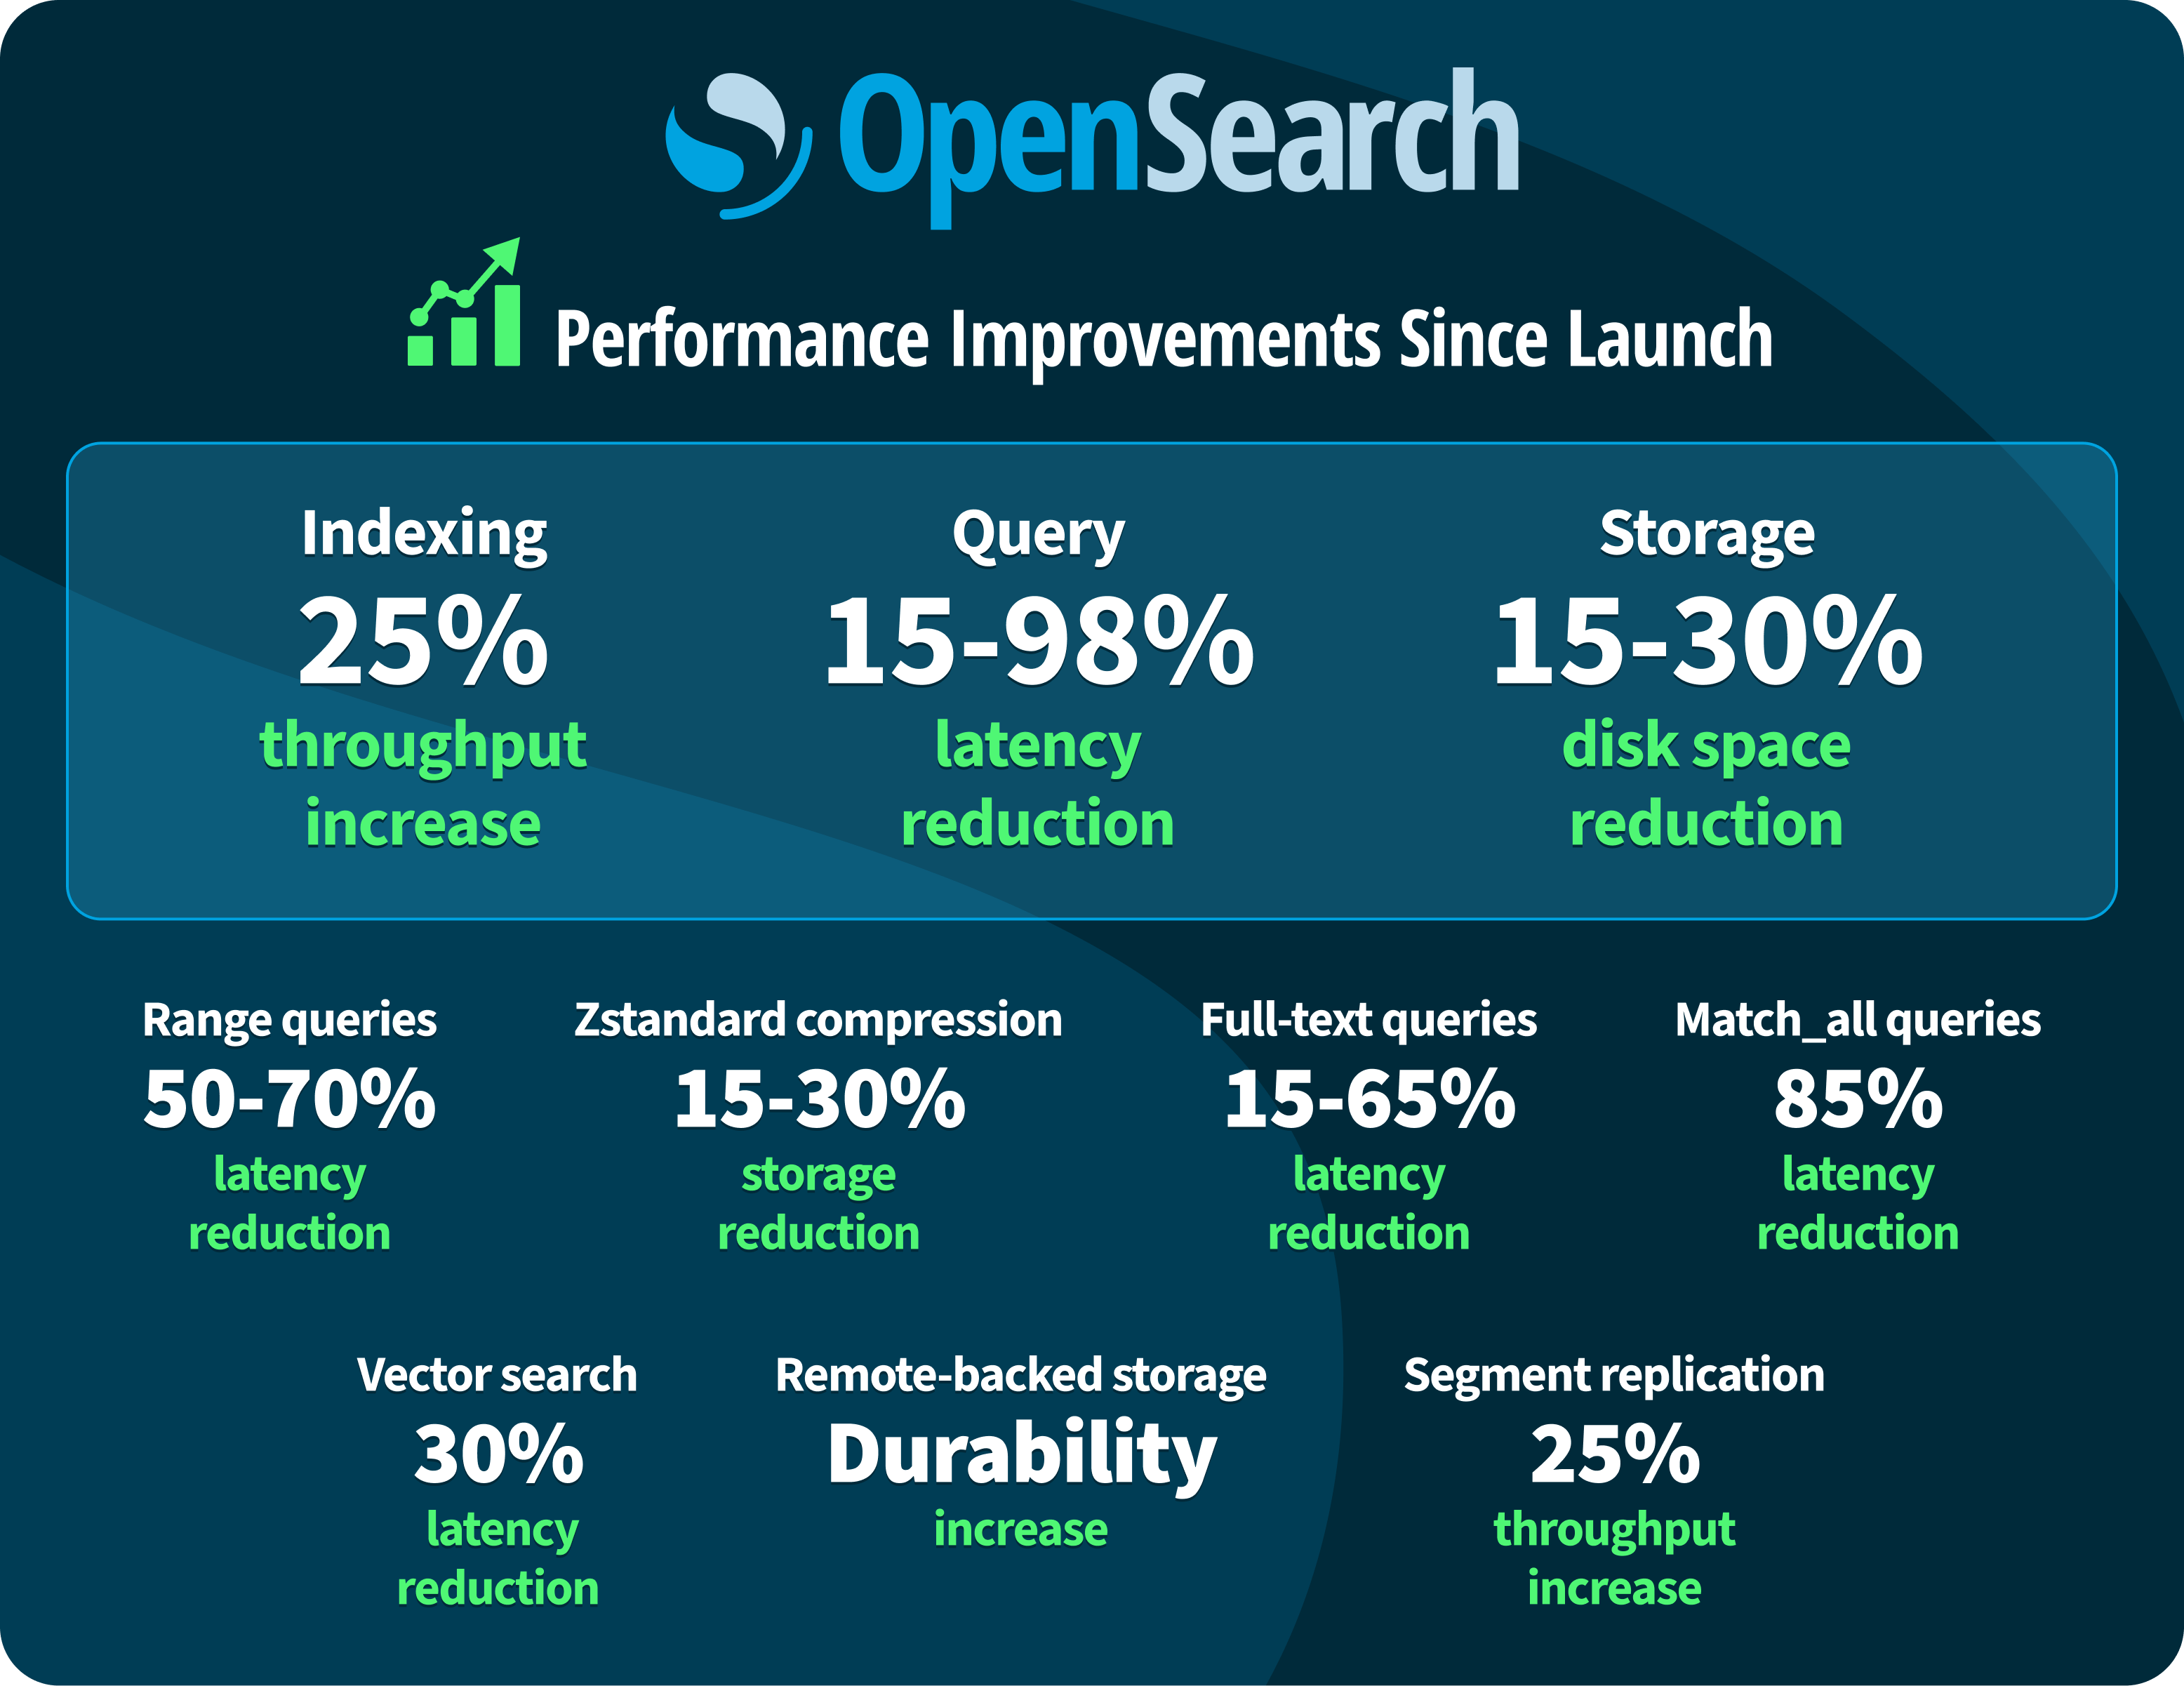 OpenSearch performance improvements since launch